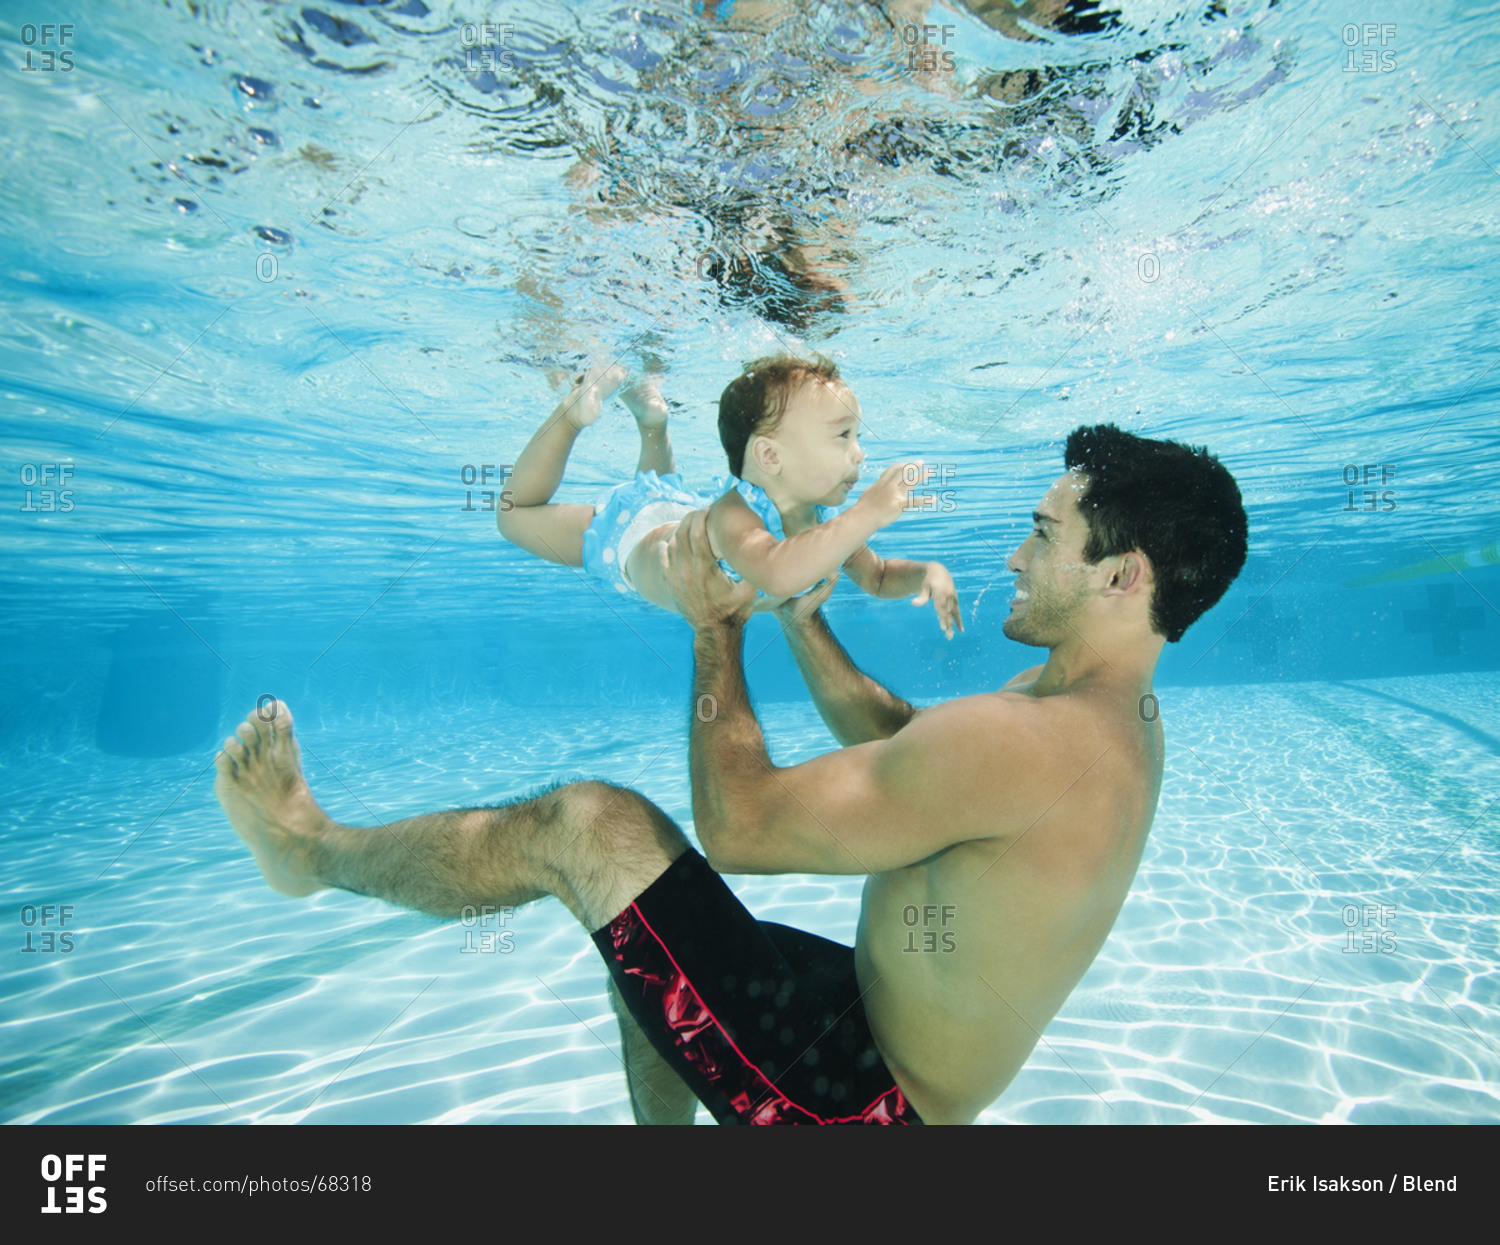 Father swimming underwater with daughter in swimming pool